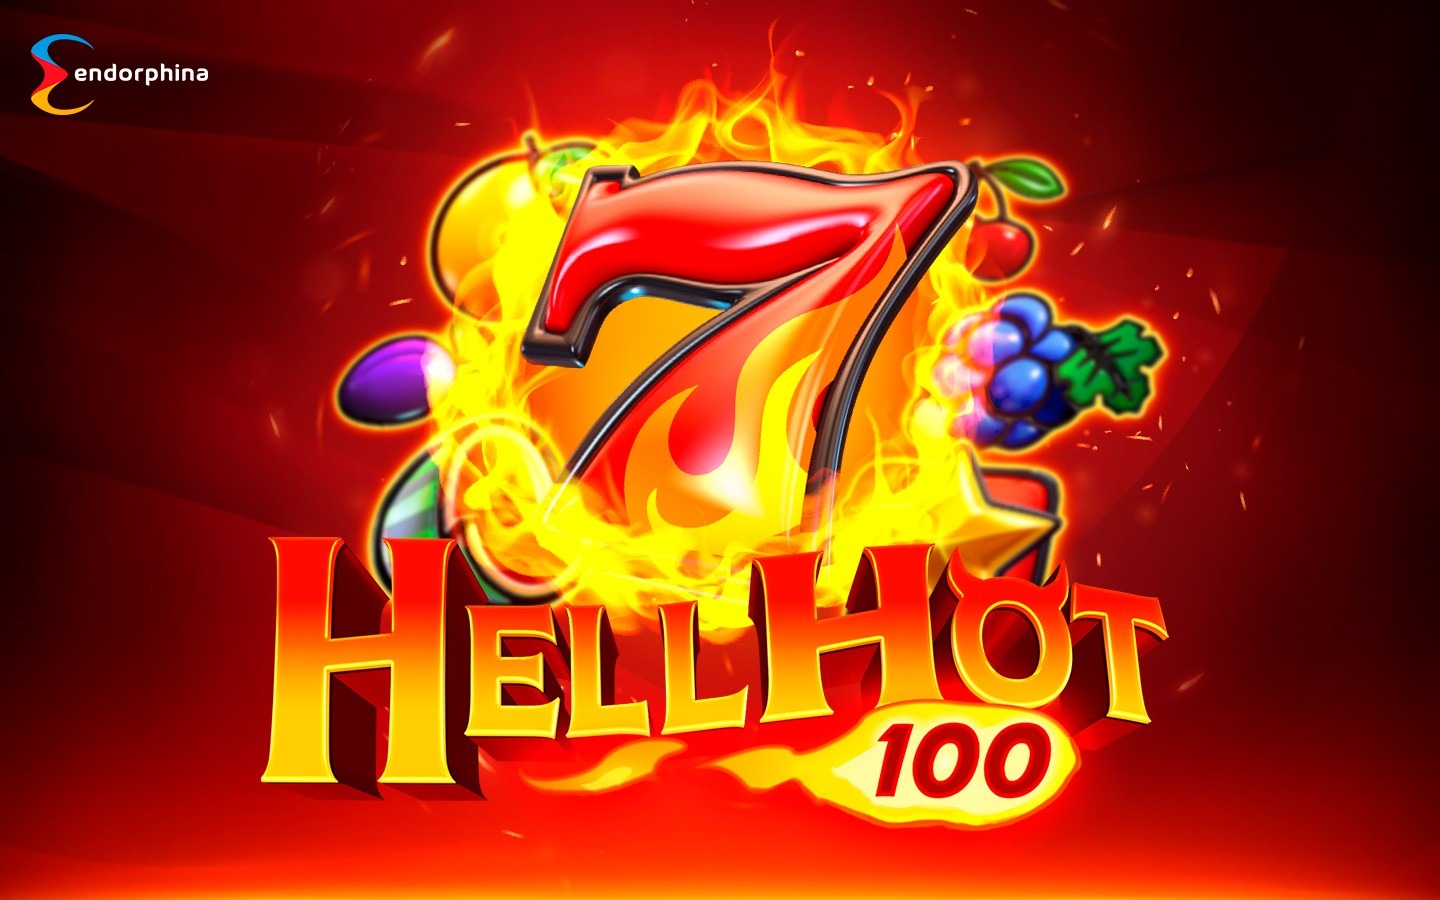 hell hot 100 review